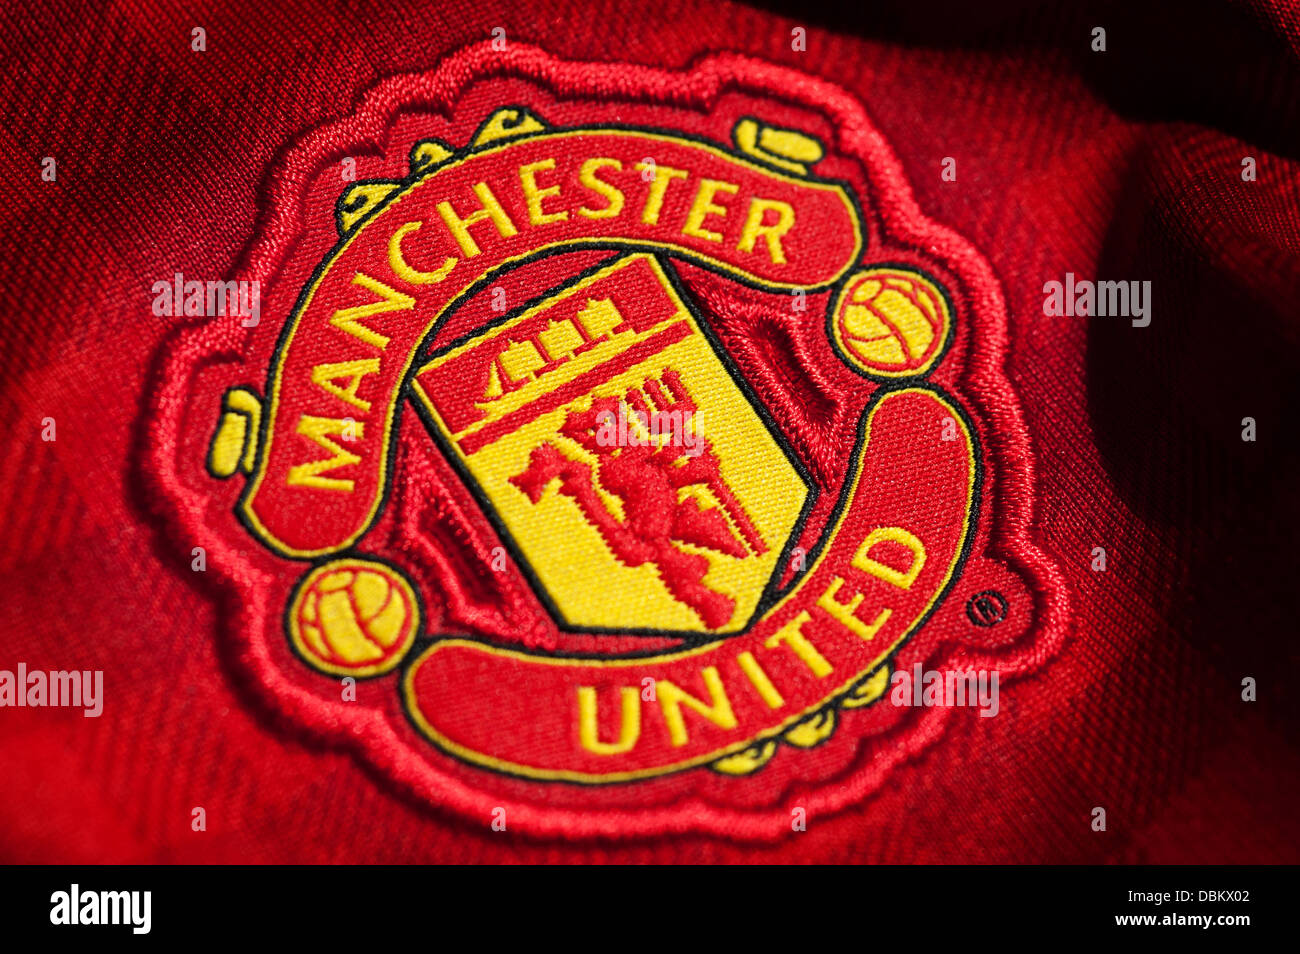 Manchester United Football Club Crest Banque D'Images